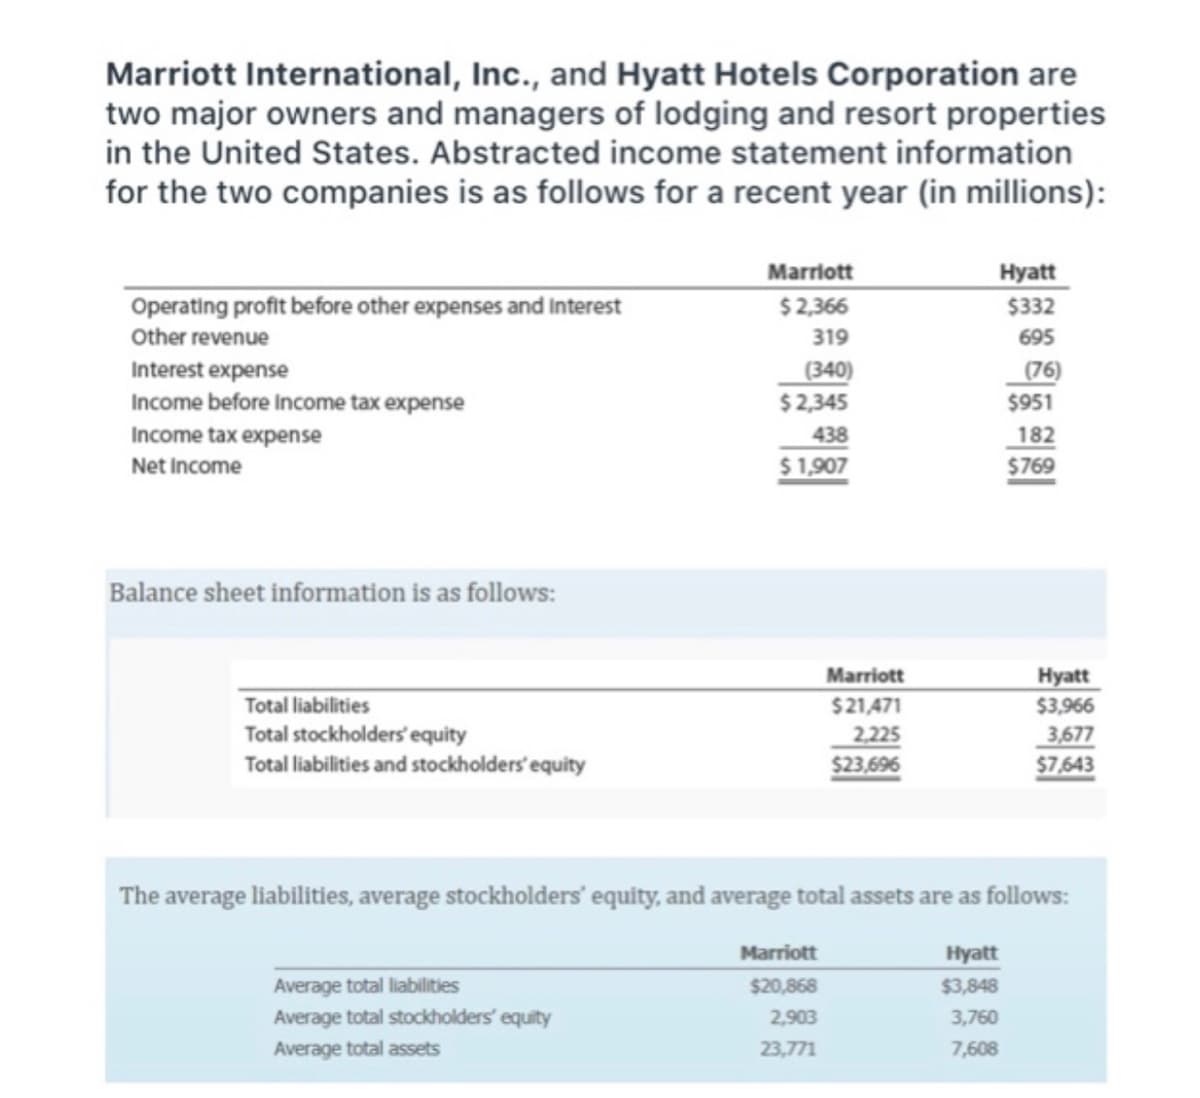 Marriott International, Inc., and Hyatt Hotels Corporation are
two major owners and managers of lodging and resort properties
in the United States. Abstracted income statement information
for the two companies is as follows for a recent year (in millions):
Operating profit before other expenses and Interest
Other revenue
Interest expense
Income before Income tax expense
Income tax expense
Net Income
Balance sheet information is as follows:
Total liabilities
Total stockholders' equity
Total liabilities and stockholders' equity
Marriott
$2,366
319
(340)
$2,345
438
$1,907
Average total liabilities
Average total stockholders' equity
Average total assets
Marriott
$21,471
2,225
$23,696
Marriott
$20,868
2,903
23,771
Hyatt
$332
695
(76)
$951
182
$769
Hyatt
$3,966
The average liabilities, average stockholders' equity, and average total assets are as follows:
Hyatt
$3,848
3,760
7,608
3,677
$7,643